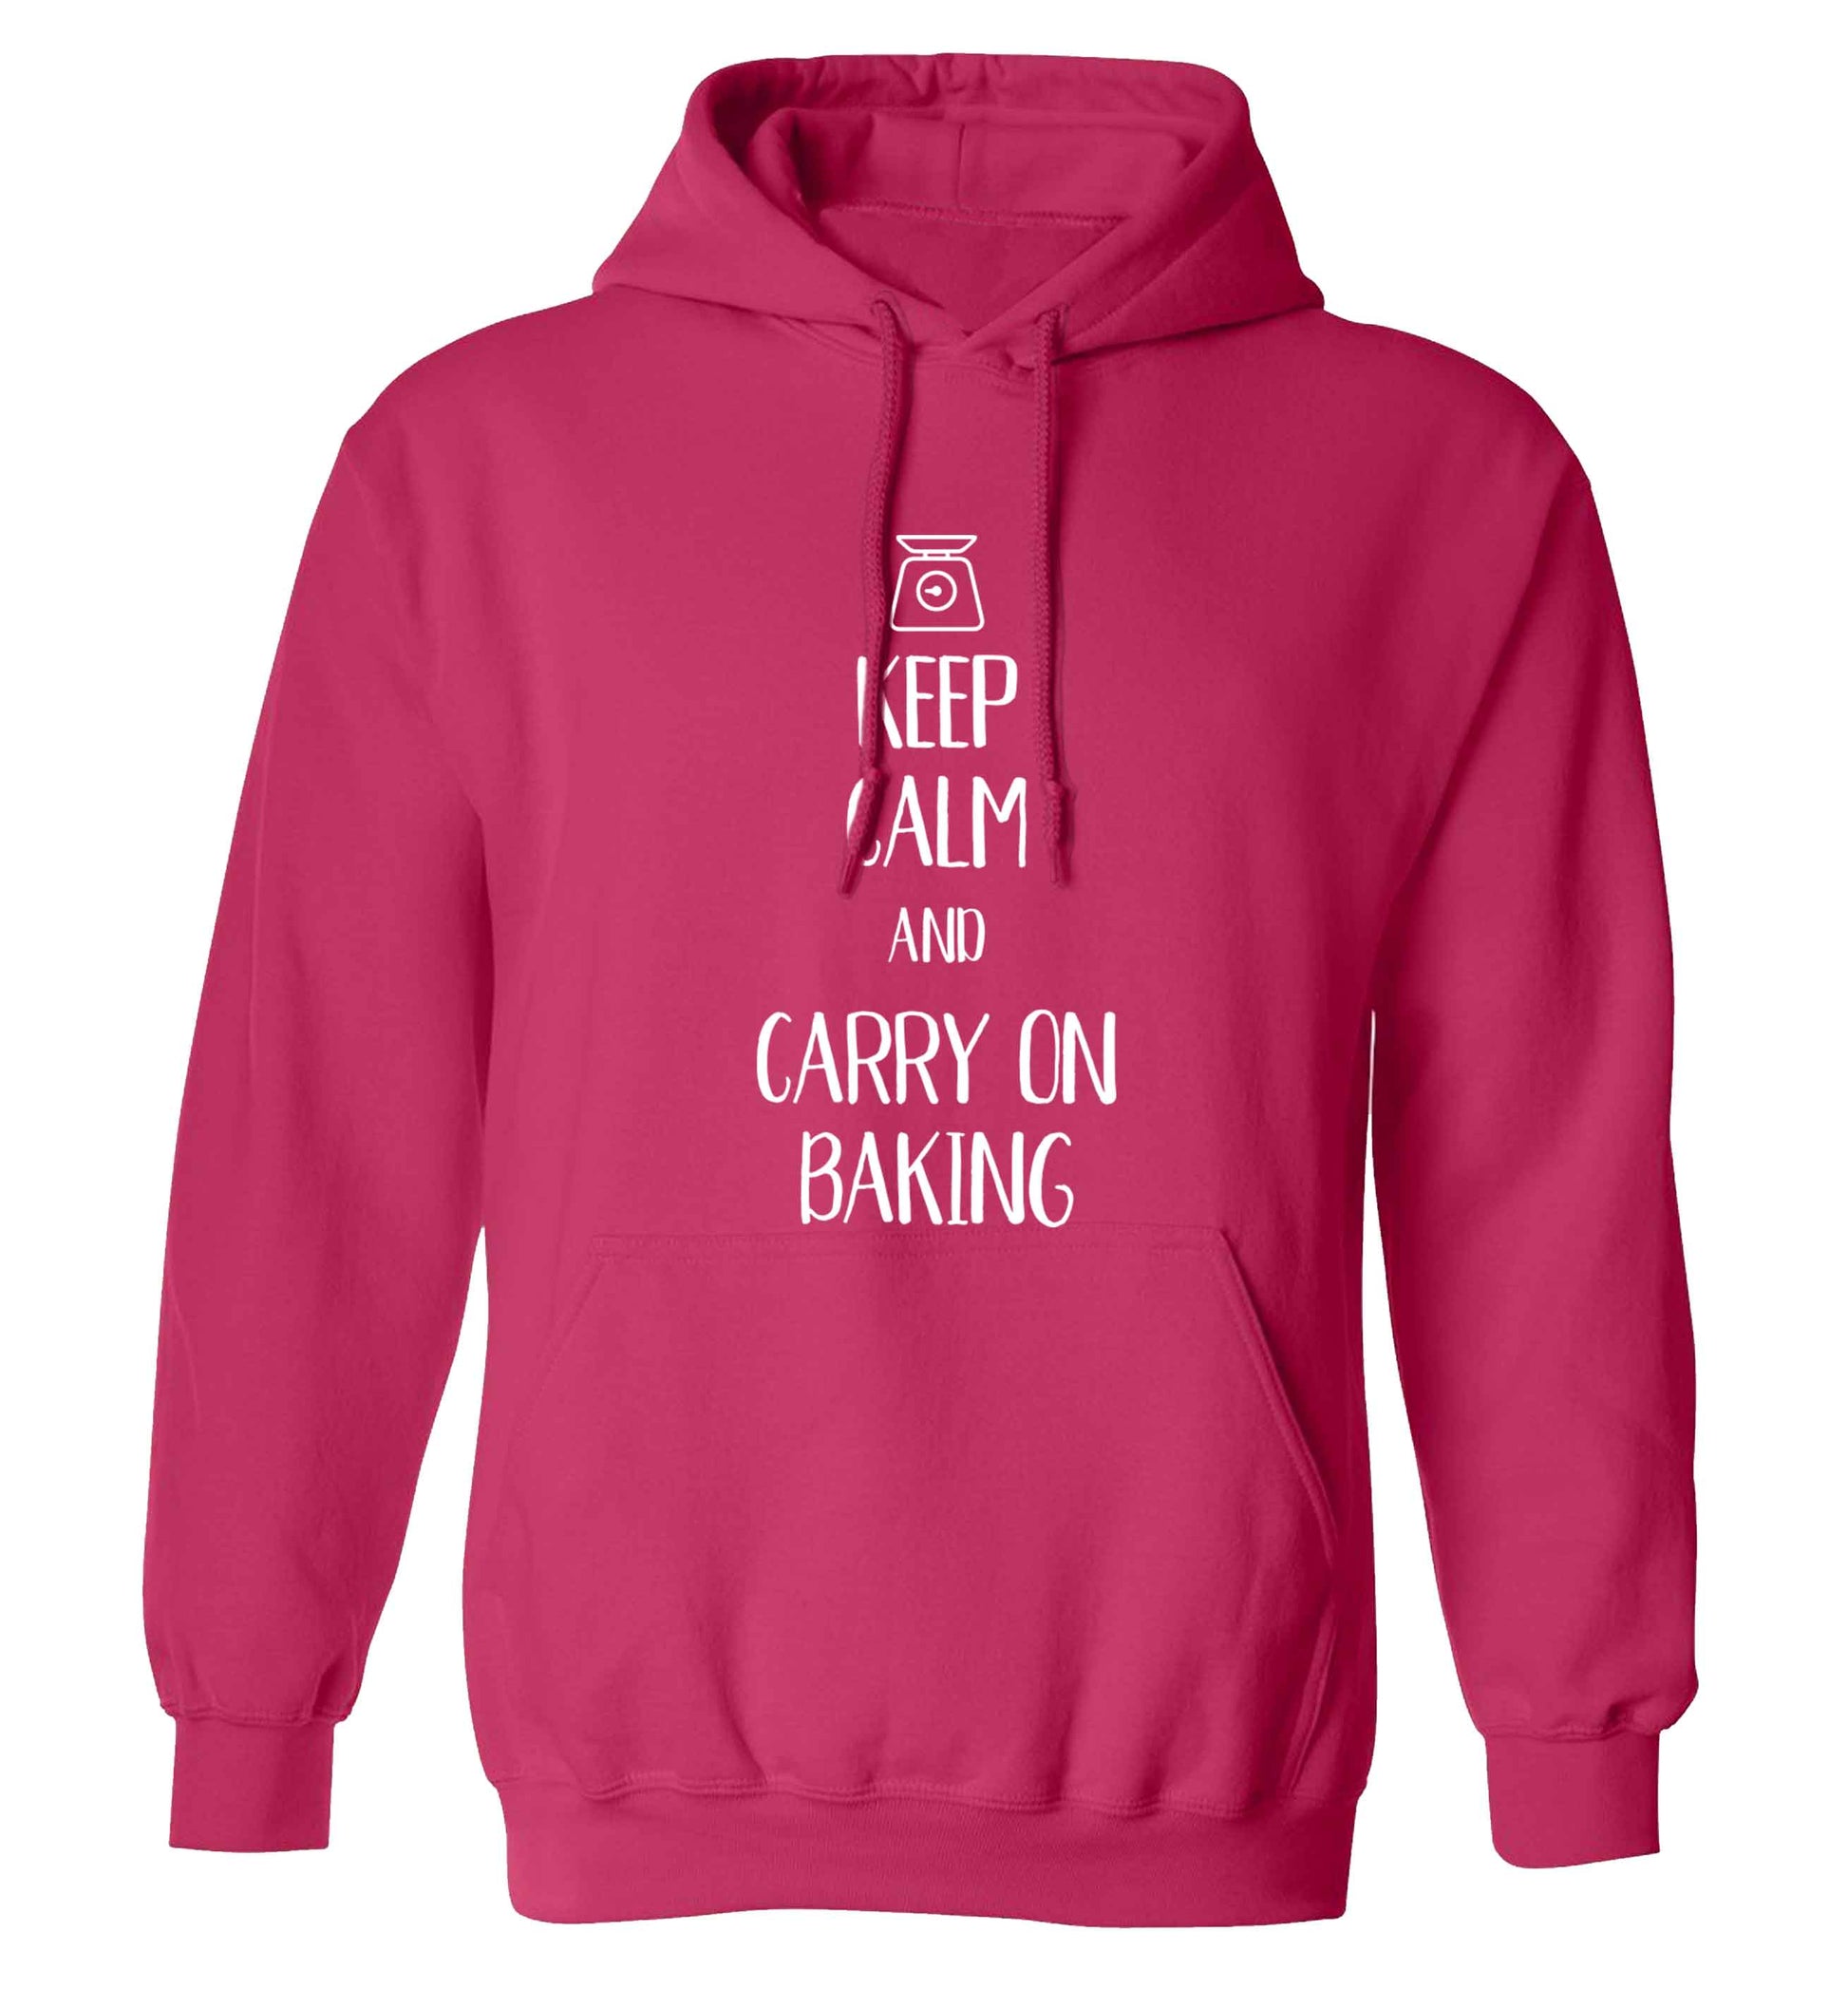 Keep calm and carry on baking adults unisex pink hoodie 2XL